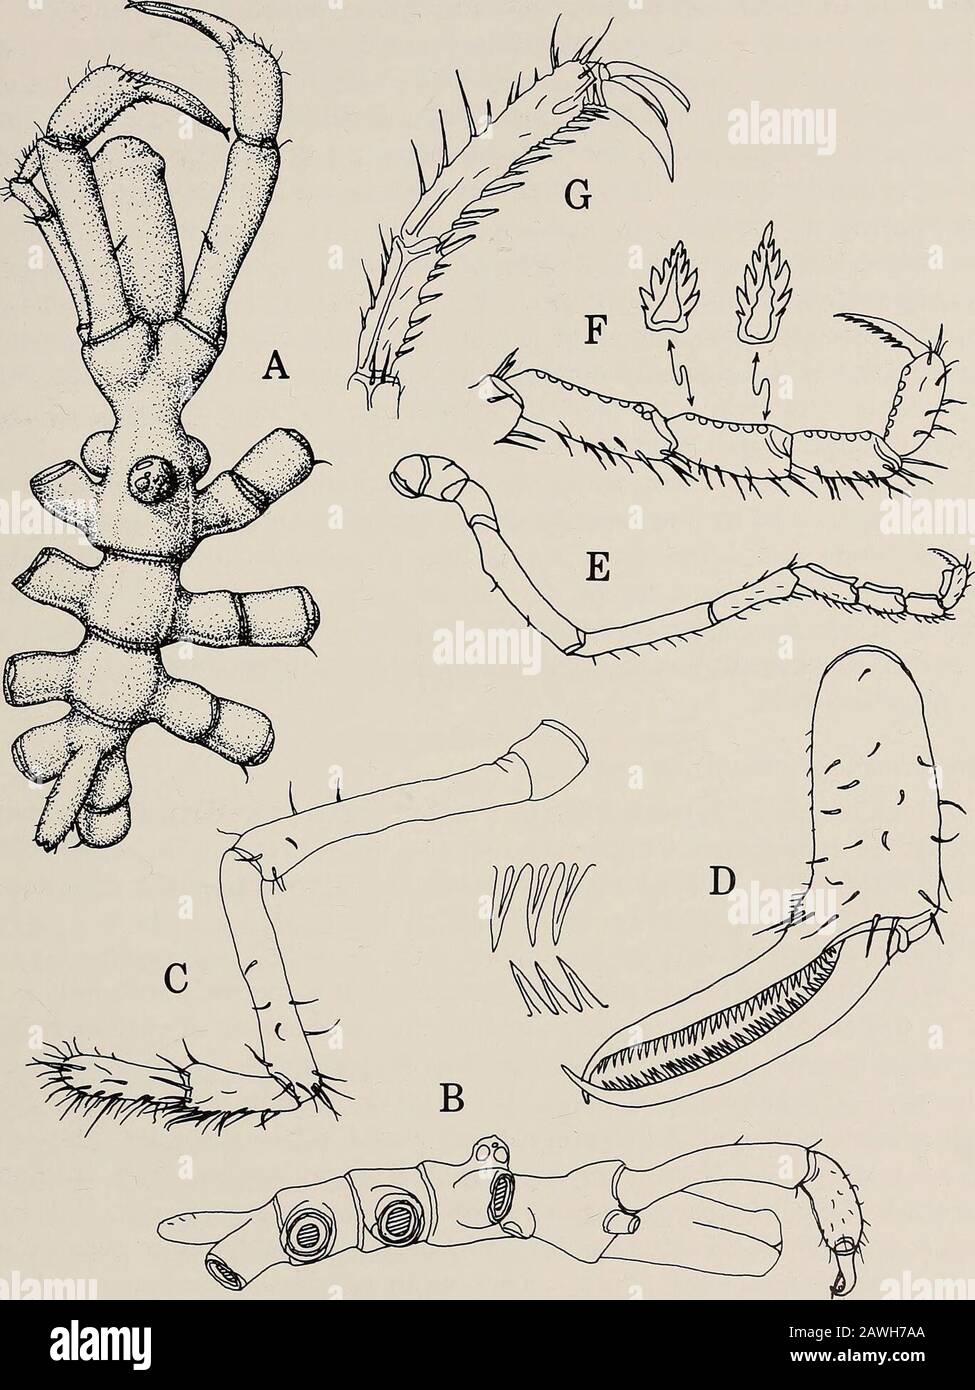 Annals of the South African Museum = Annale van die Suid-Afrikaanse Museum . ique specimen. Nymphon paralobatum sp. nov.Fig. 12 Material Transkei area. Holotype, SAM-A19571, SM 226, 32°28,6S 28°58,8E,710-775 m, 1 9. Description Moderately small, leg span 24,4 mm. Trunk completely segmented, ratherslender, lateral processes short, little longer than their diameters, separated byabout their diameters, glabrous. Neck short, oviger bases slightly anterior to firstlateral processes; ocular tubercle between oviger bases and first lateral pro-cesses, short, not as tall as wide, with tiny apical papil Stock Photo